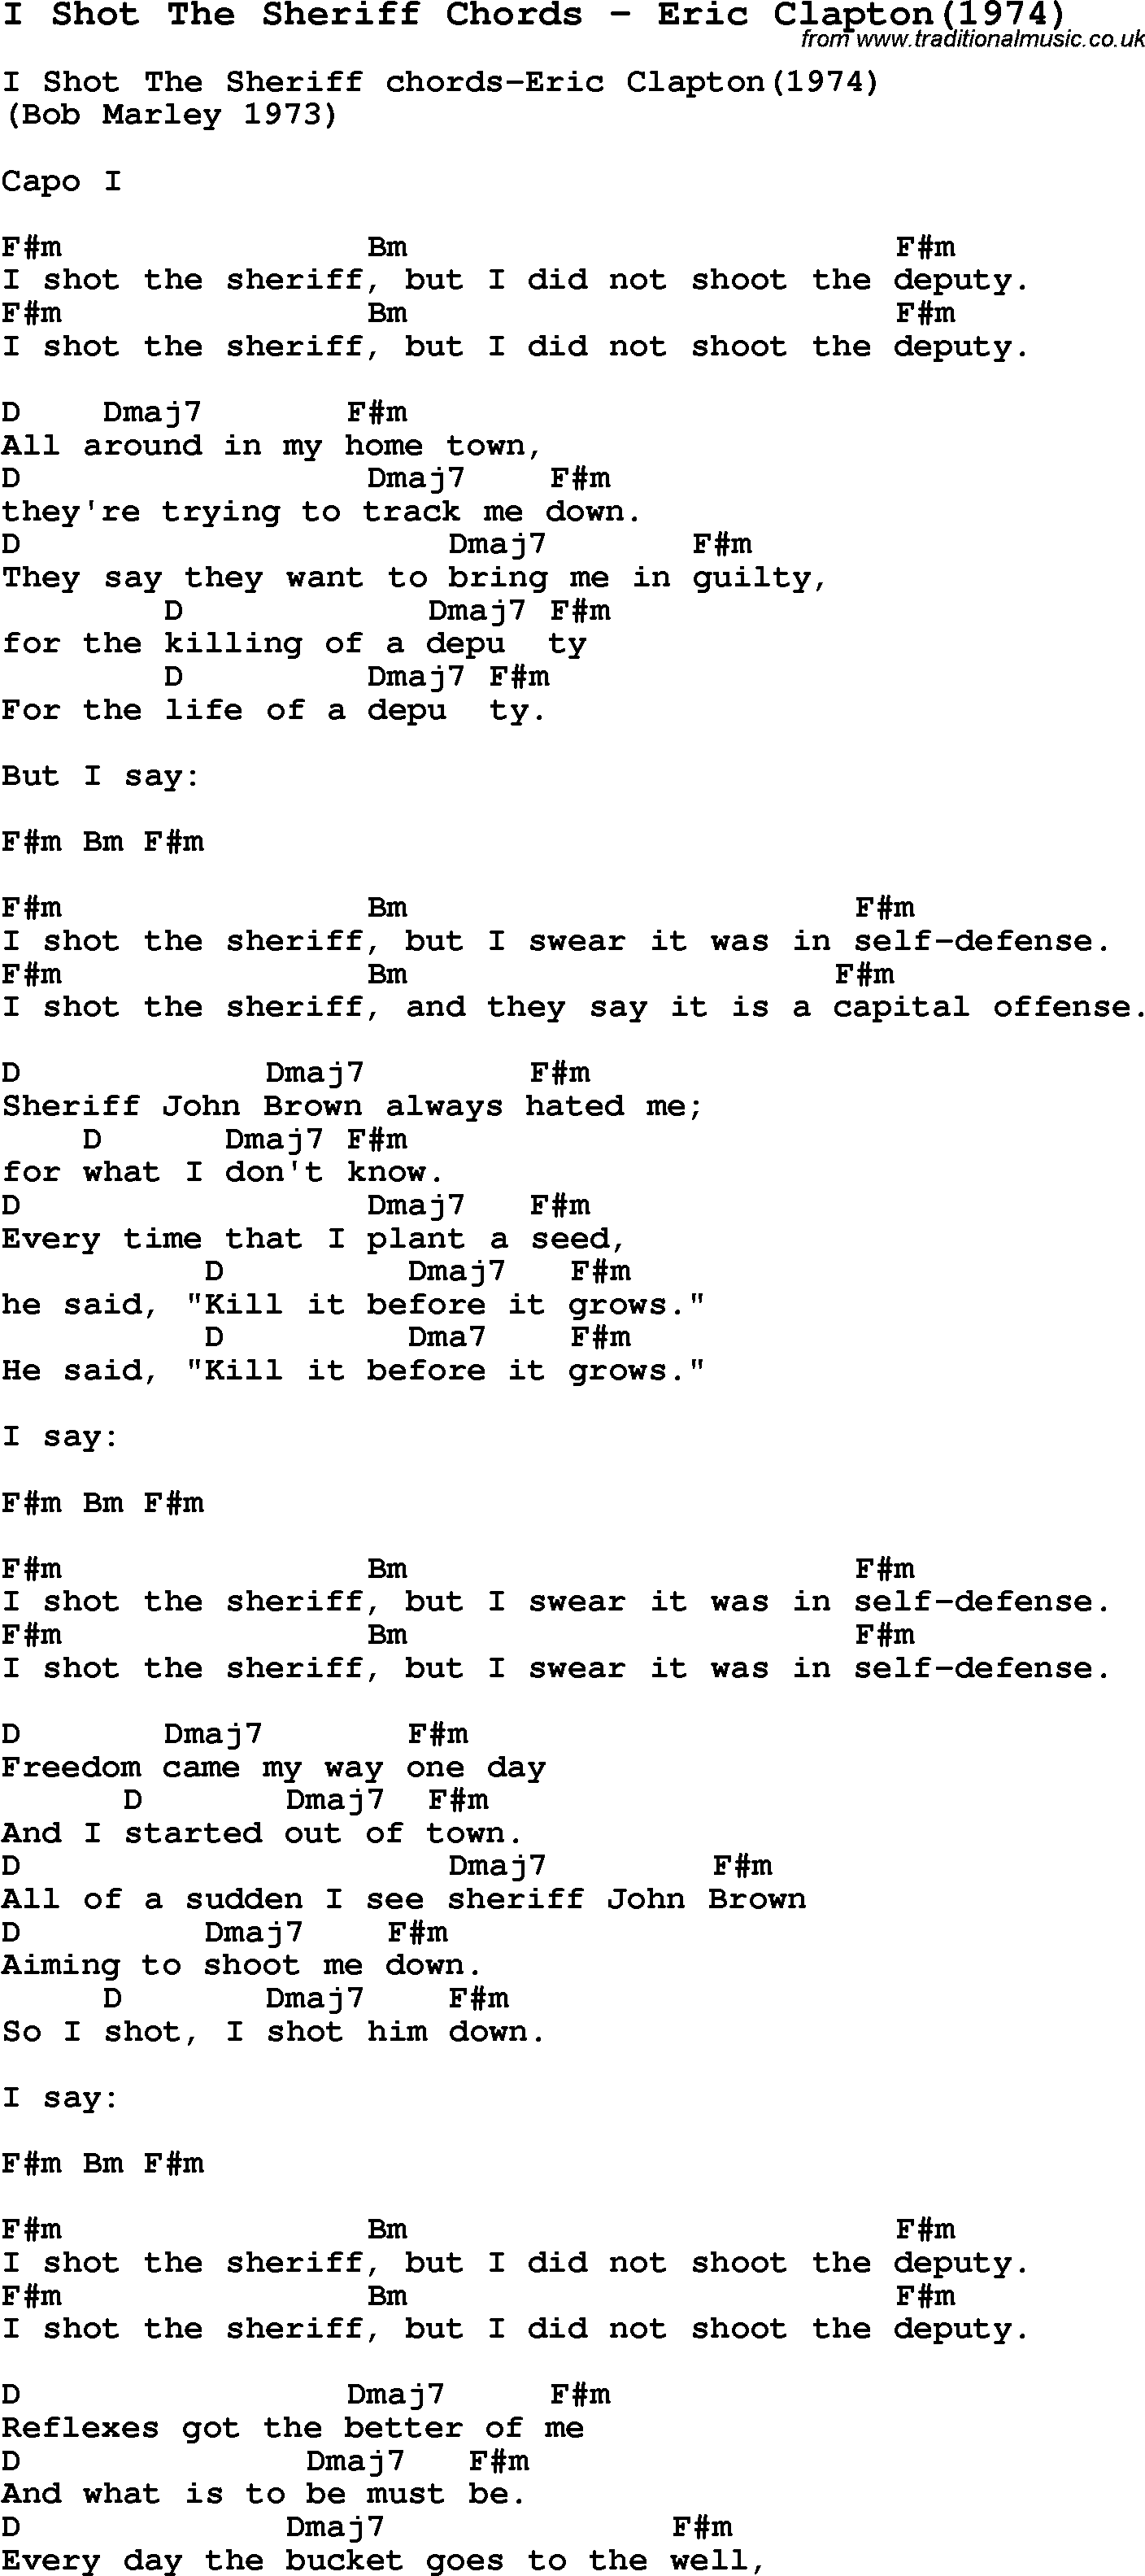 Song I Shot The Sheriff Chords by Eric Clapton(1974), with lyrics for vocal performance and accompaniment chords for Ukulele, Guitar Banjo etc.